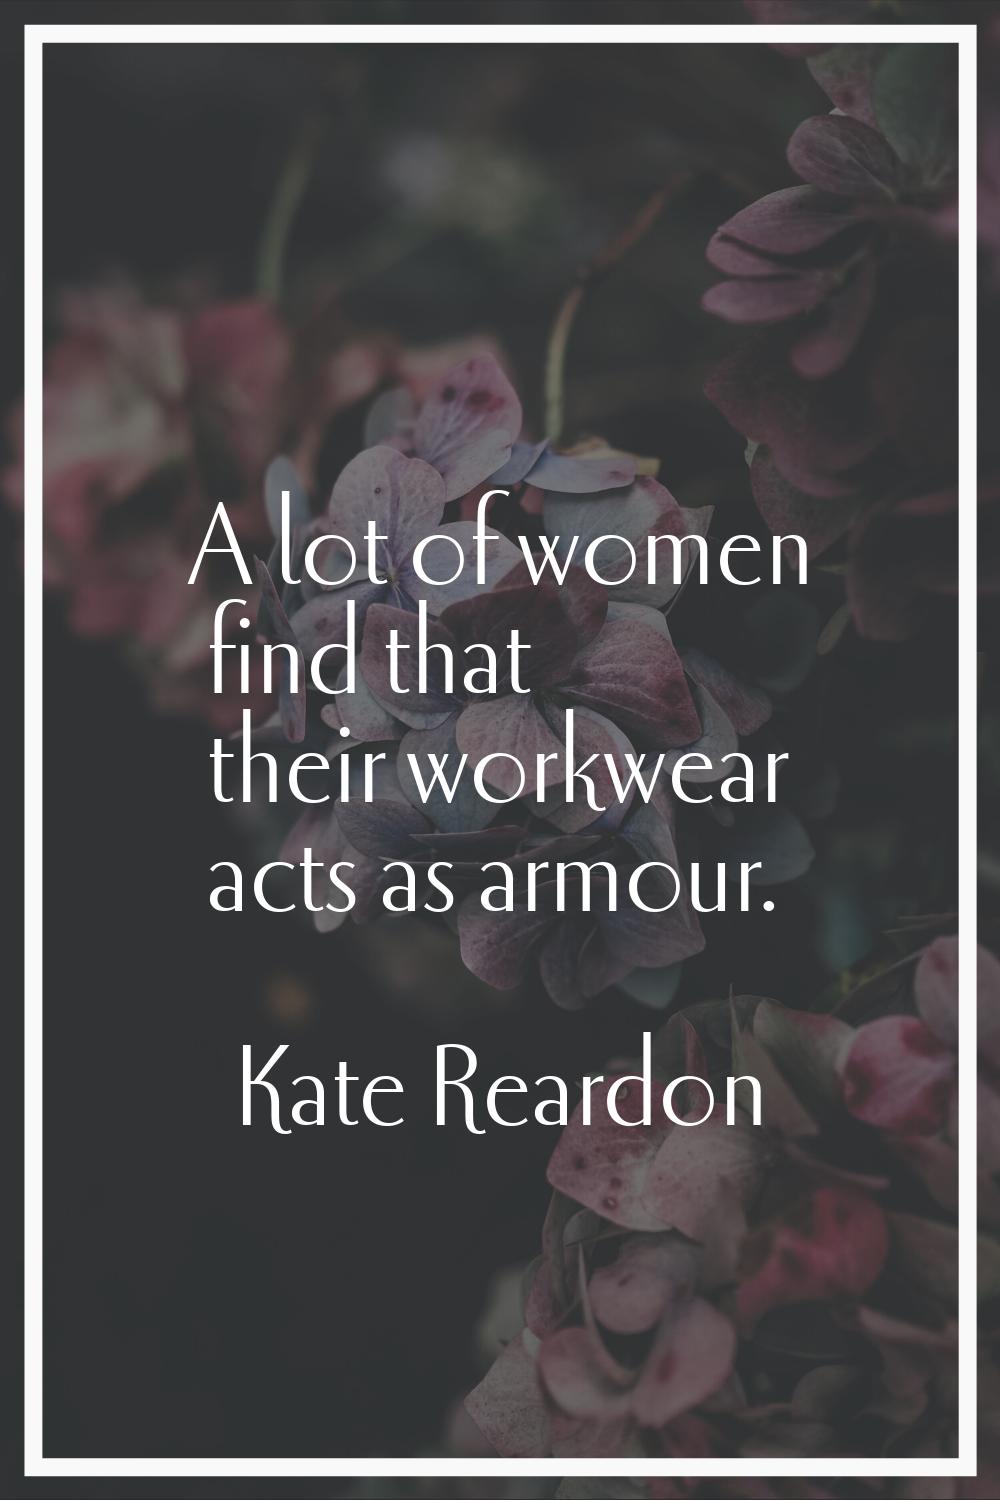 A lot of women find that their workwear acts as armour.